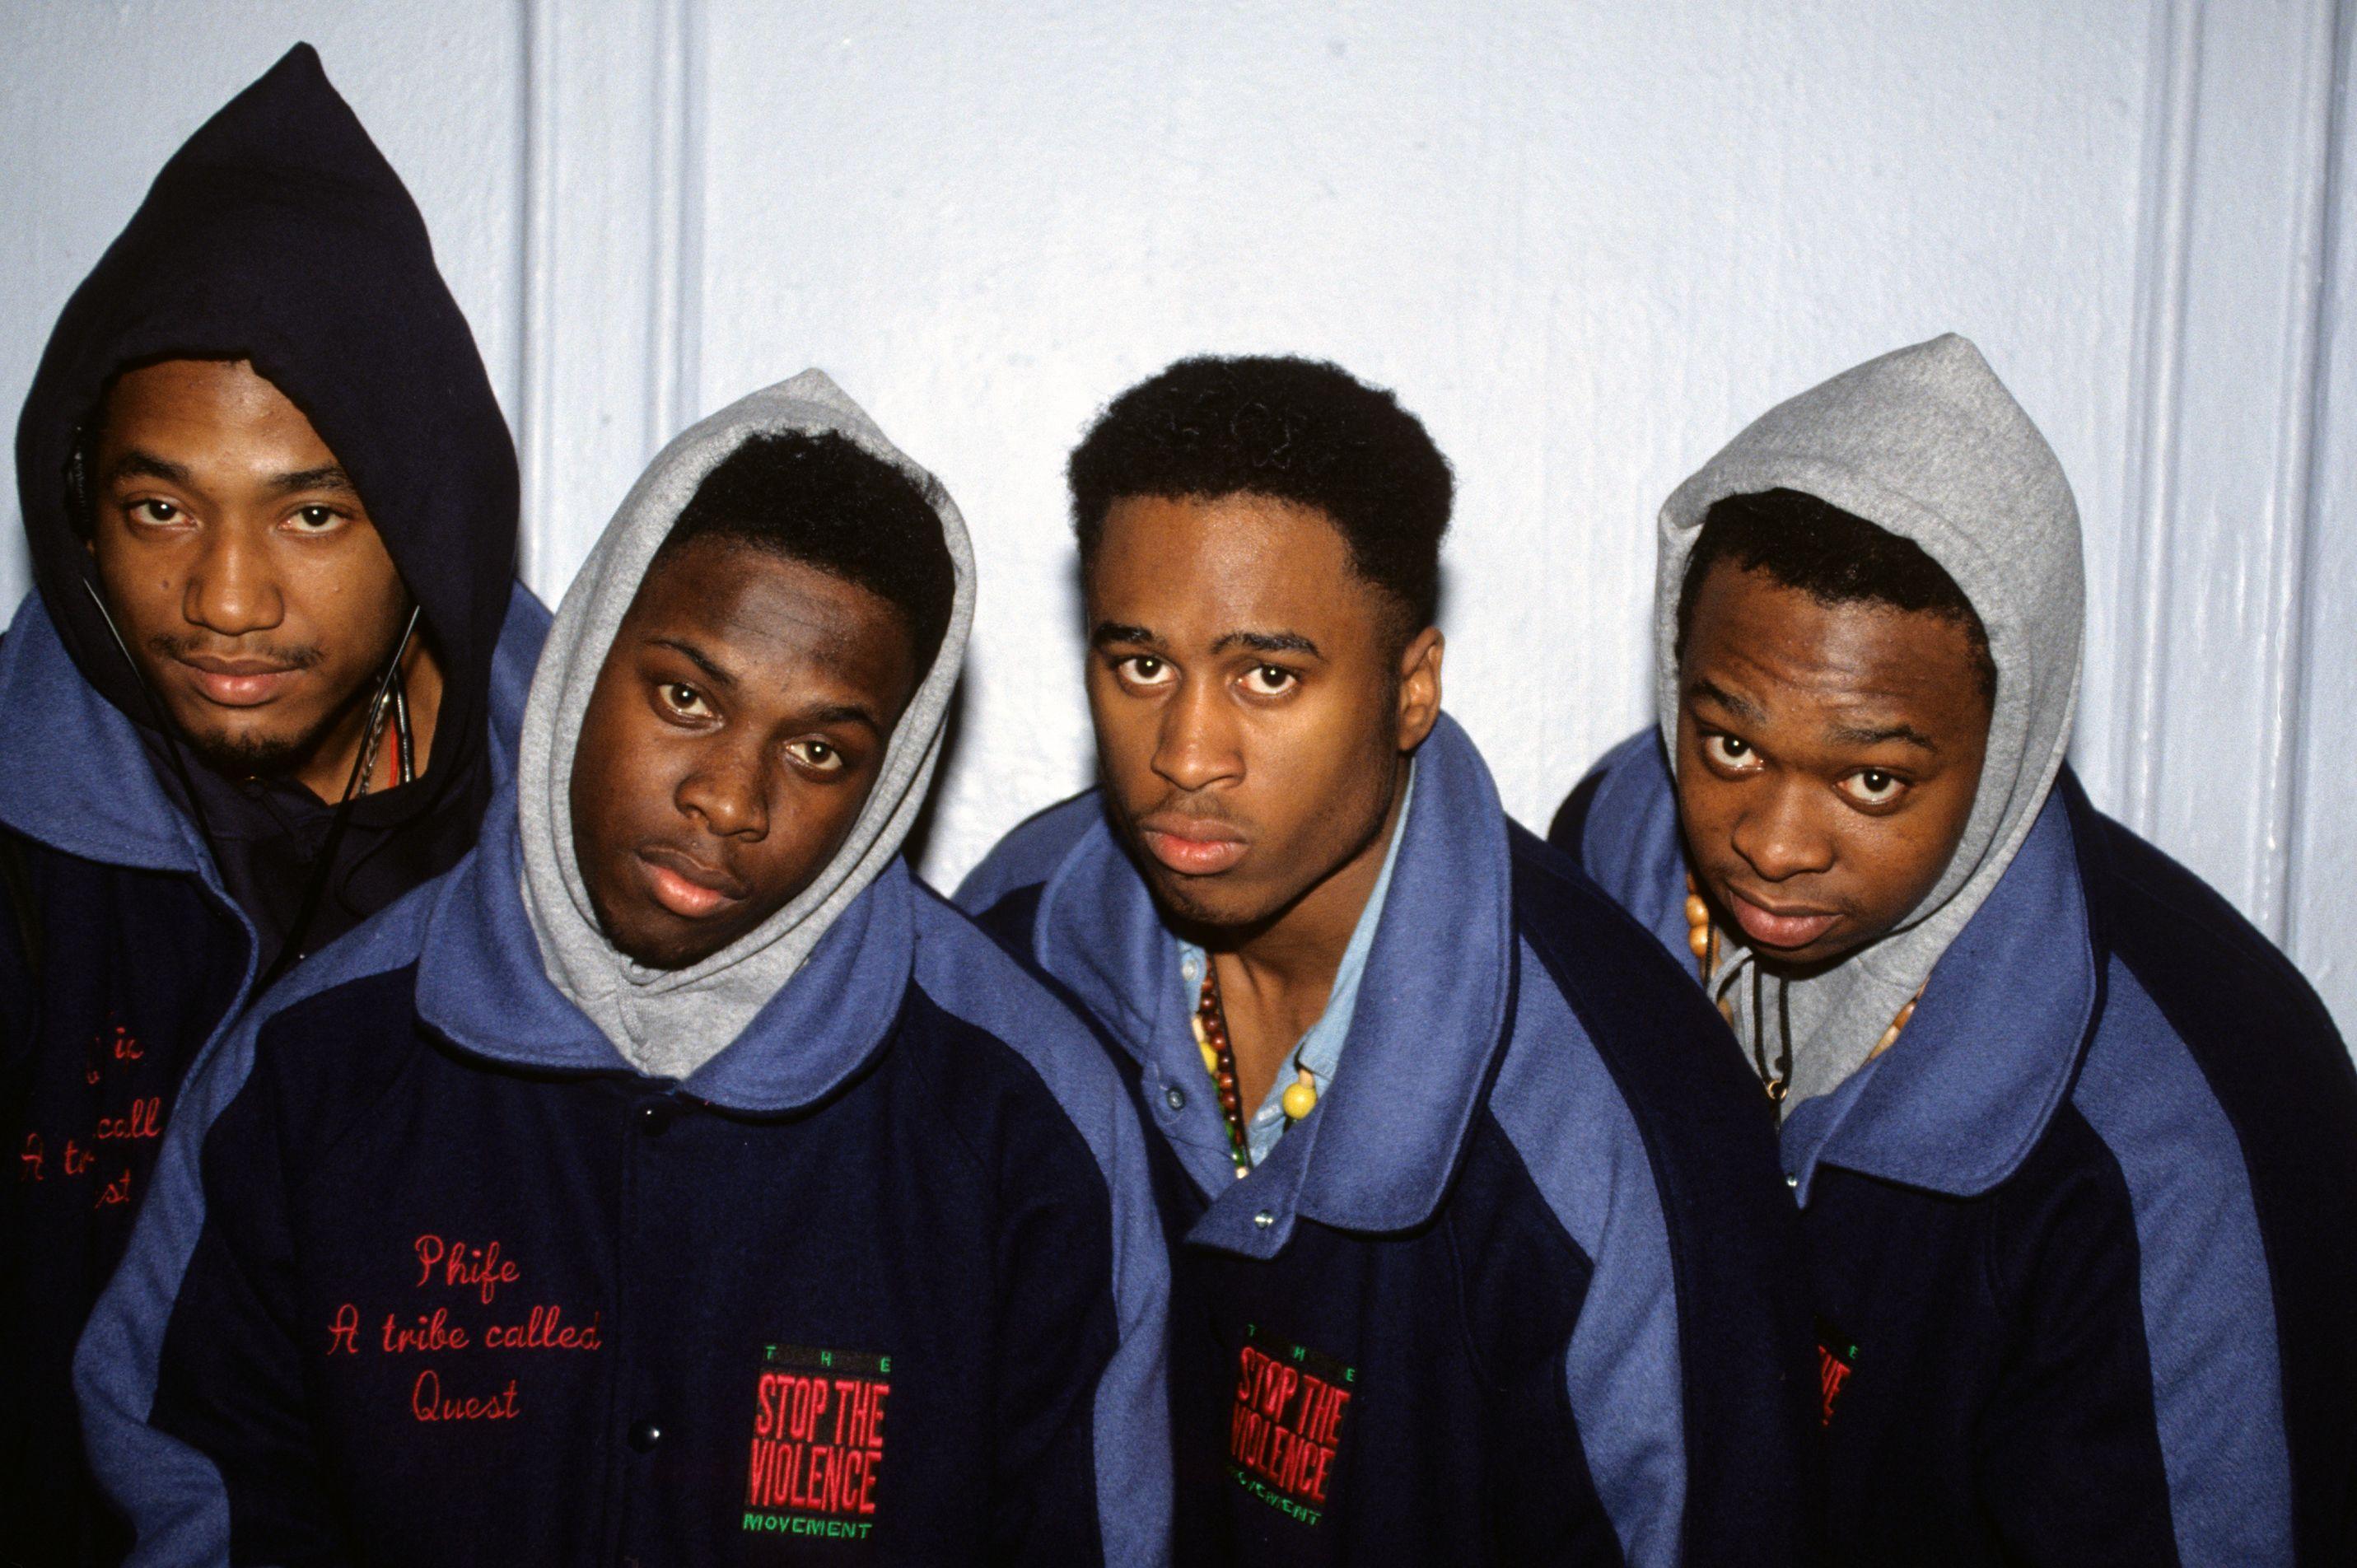 2862x1904px 5275.22 KB A Tribe Called Quest